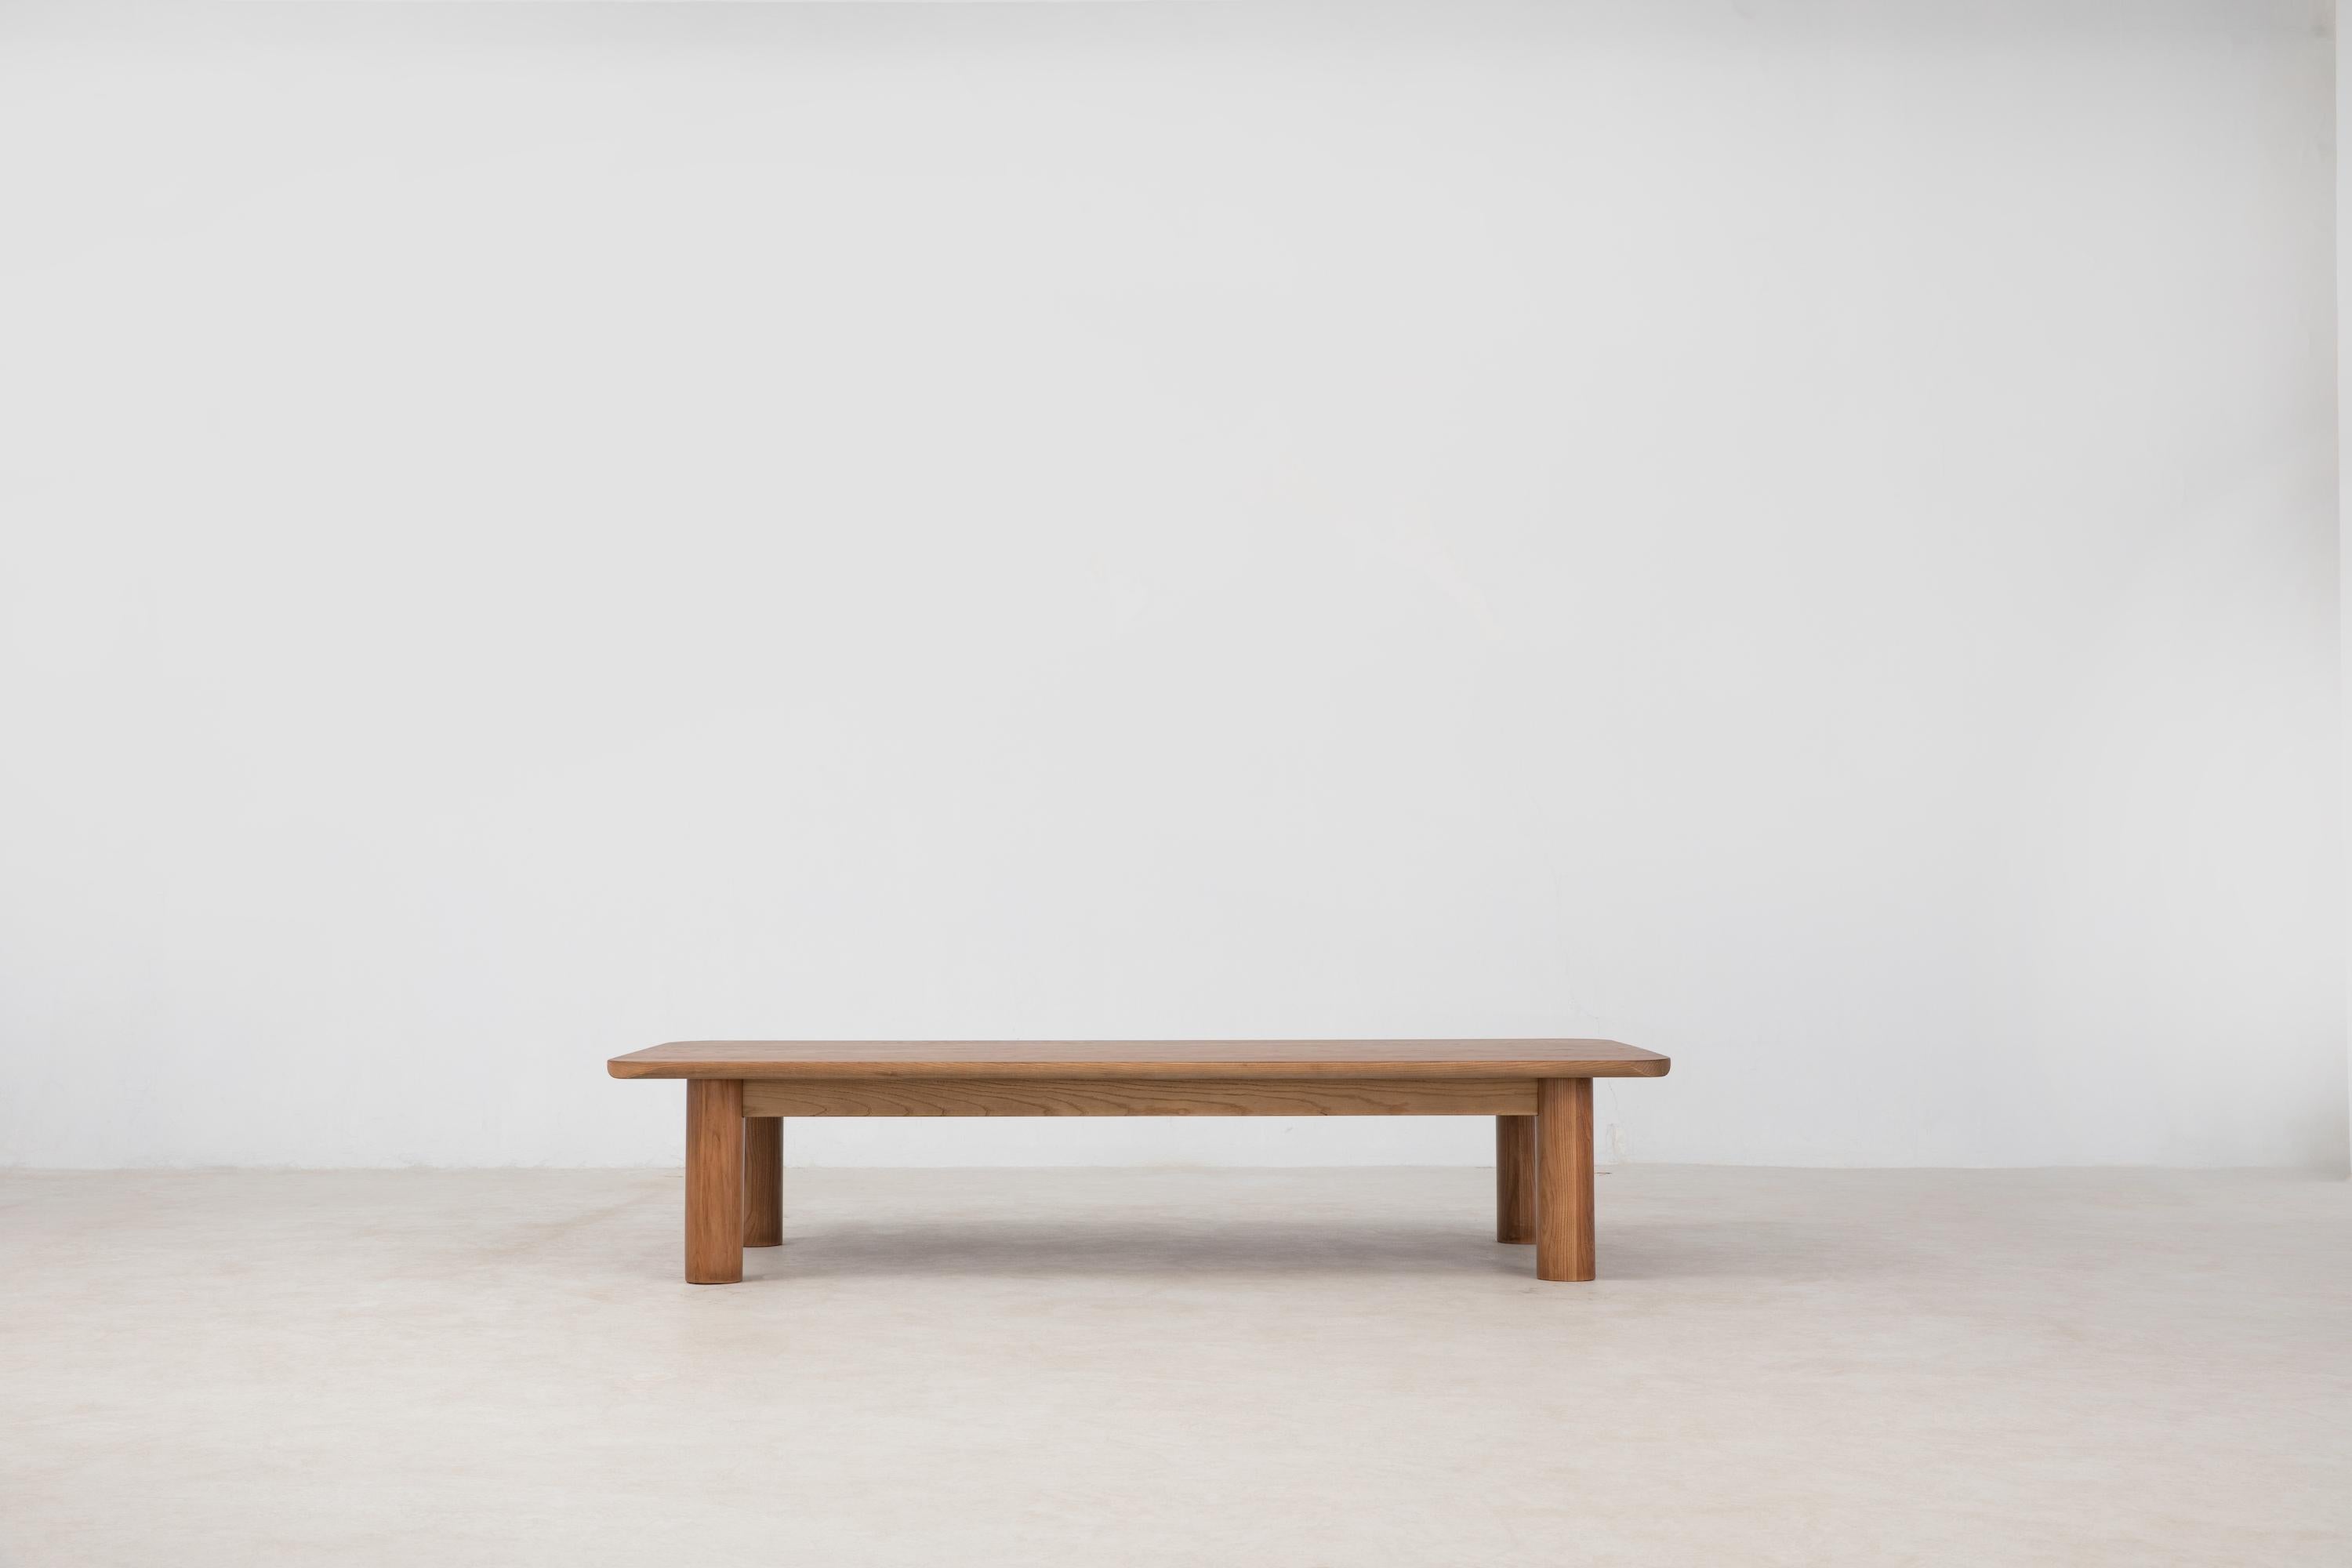 The Arc Coffee Table features the wide cylindrical legs characteristic of the Arc series. All solid FSC® Certified American White Ash and traditional joinery. Please note that we make each piece by hand, and every tree is different, so you’ll see